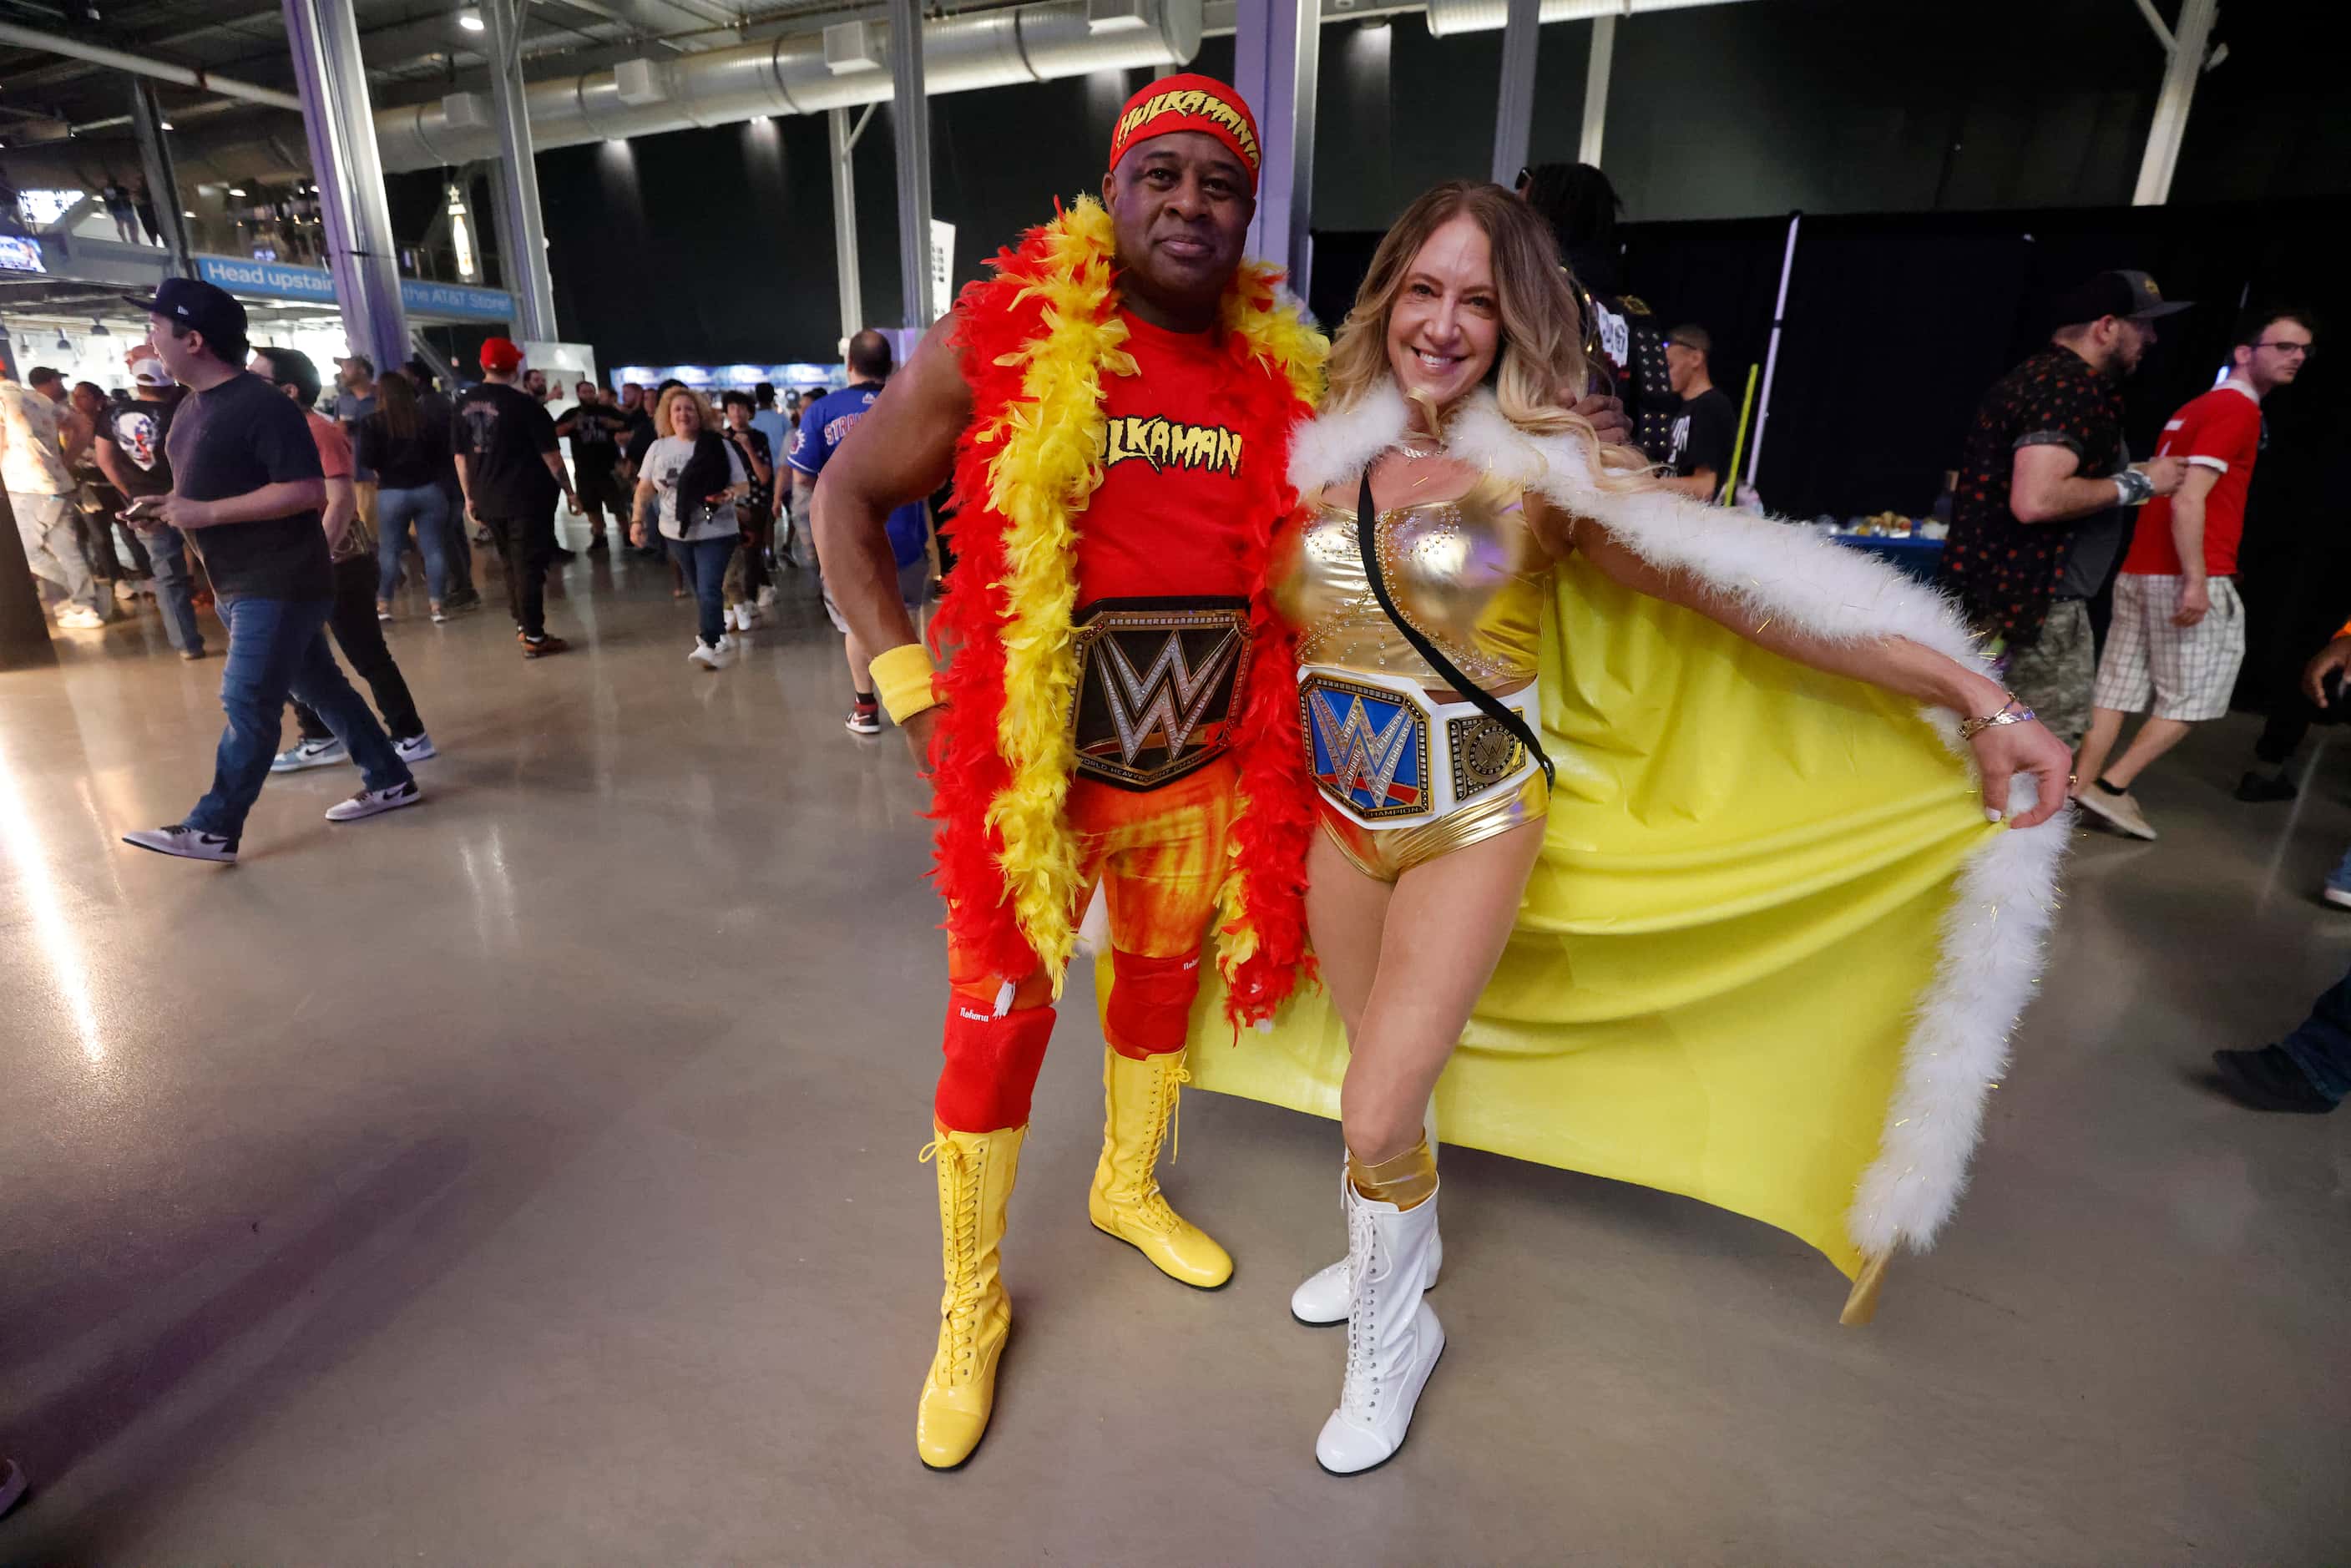 Fans pose during WrestleMania in Arlington, Texas on Saturday, April 2, 2022. 